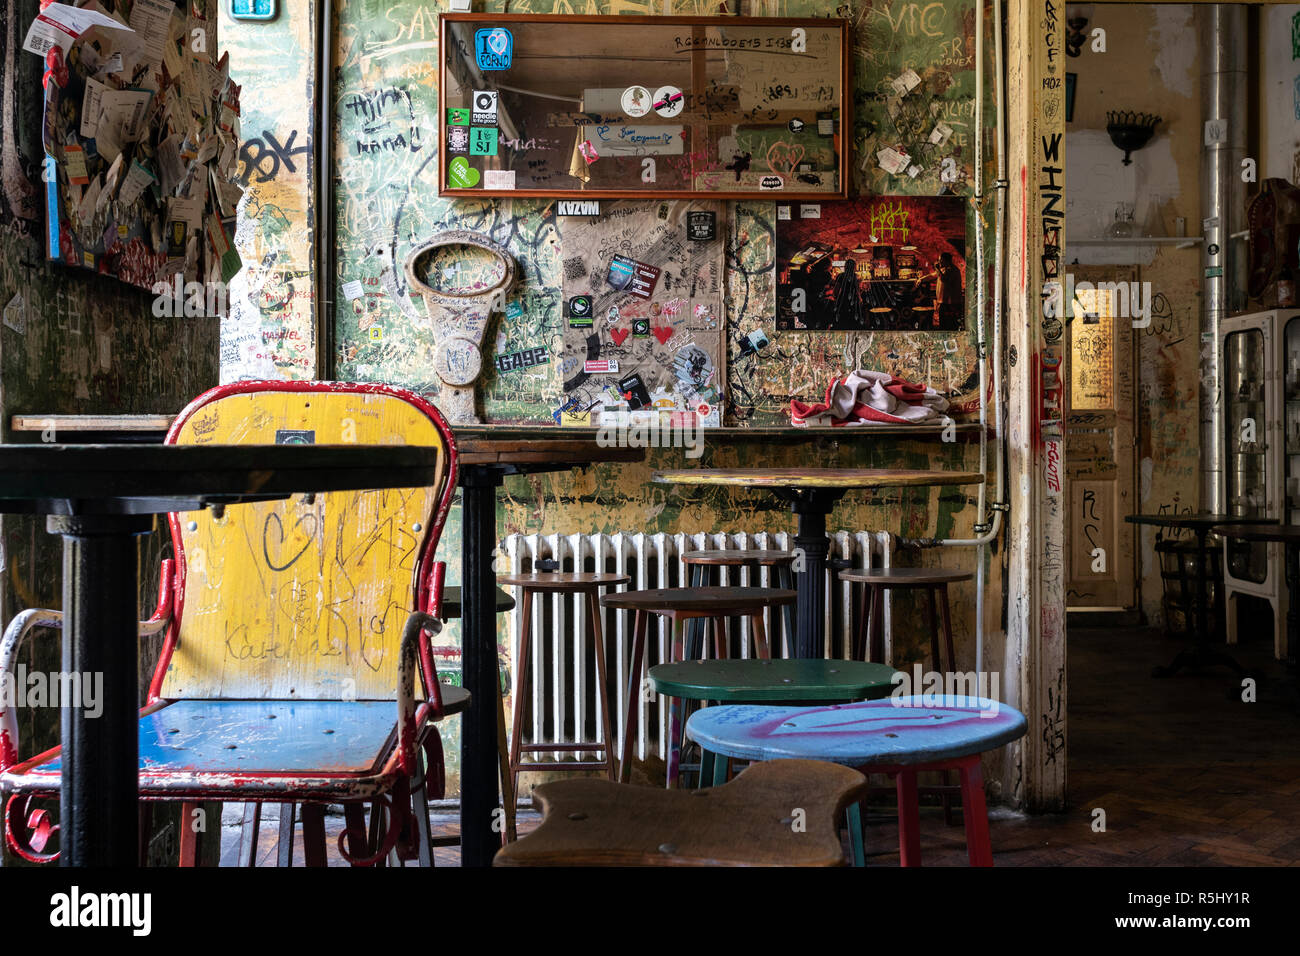 BUDAPEST, HUNGARY - August 12, 2018: Pub interiors with vintage furniture in Szimpla kert ruin pub and farmers market, a popular tourist destinations  Stock Photo